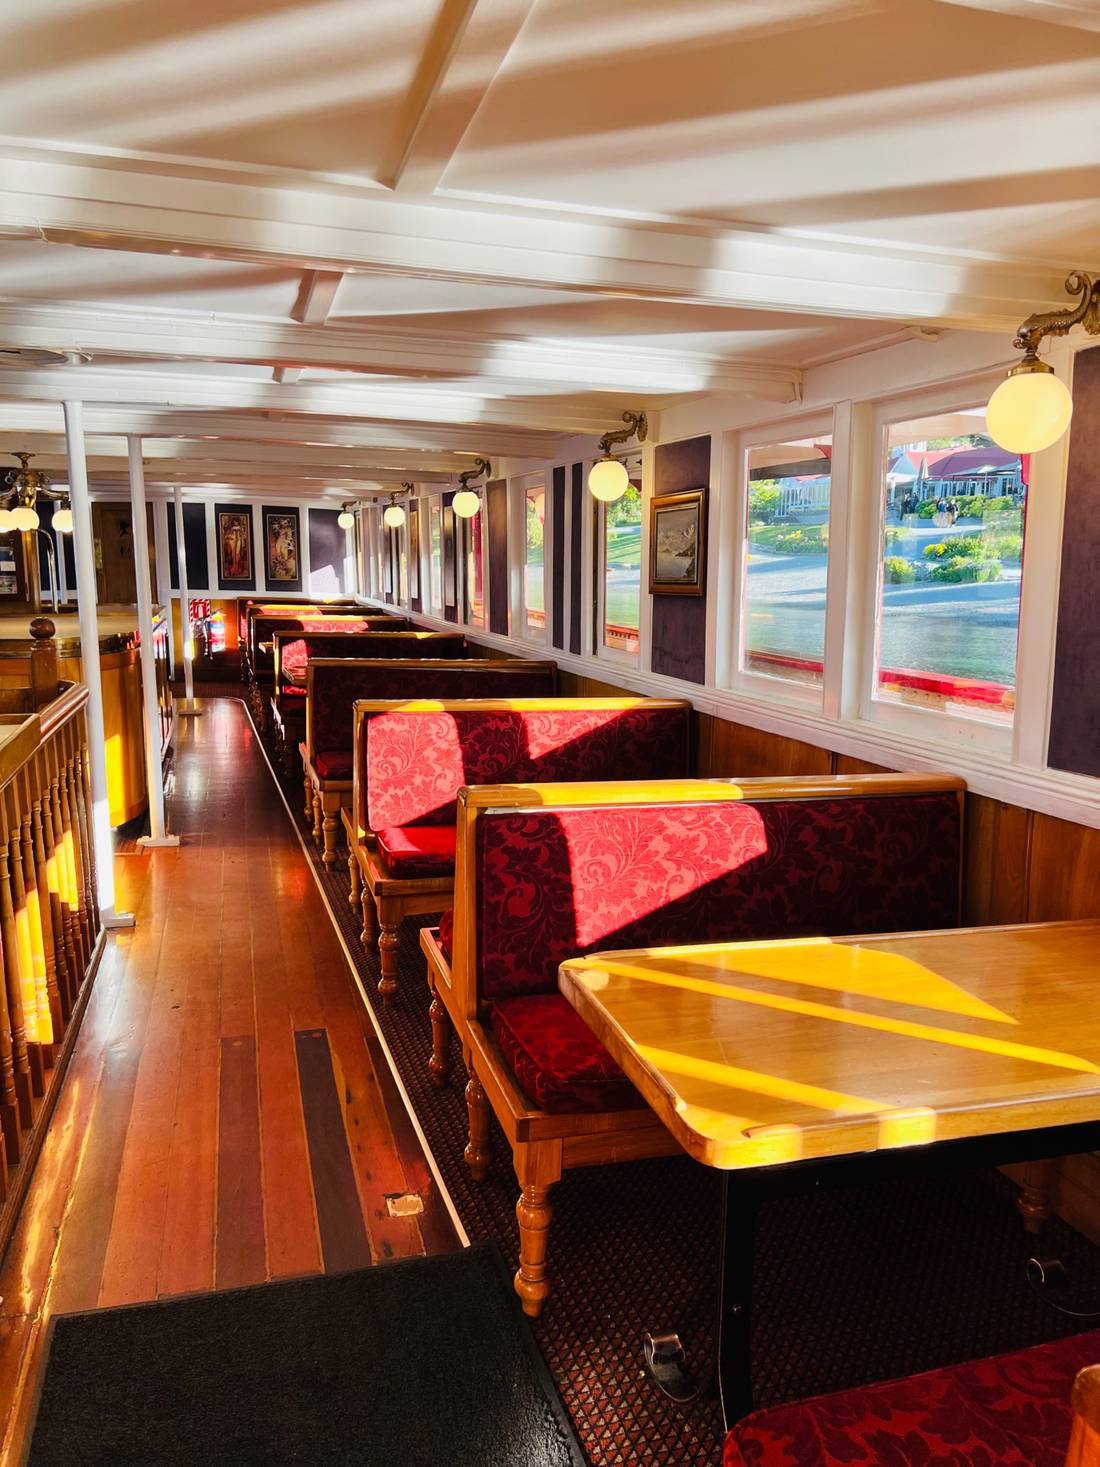 Inside the lower level passengers compartment. The boat has been refurbished on the interior, decked out with some beautiful red velvet, and treated timbers.